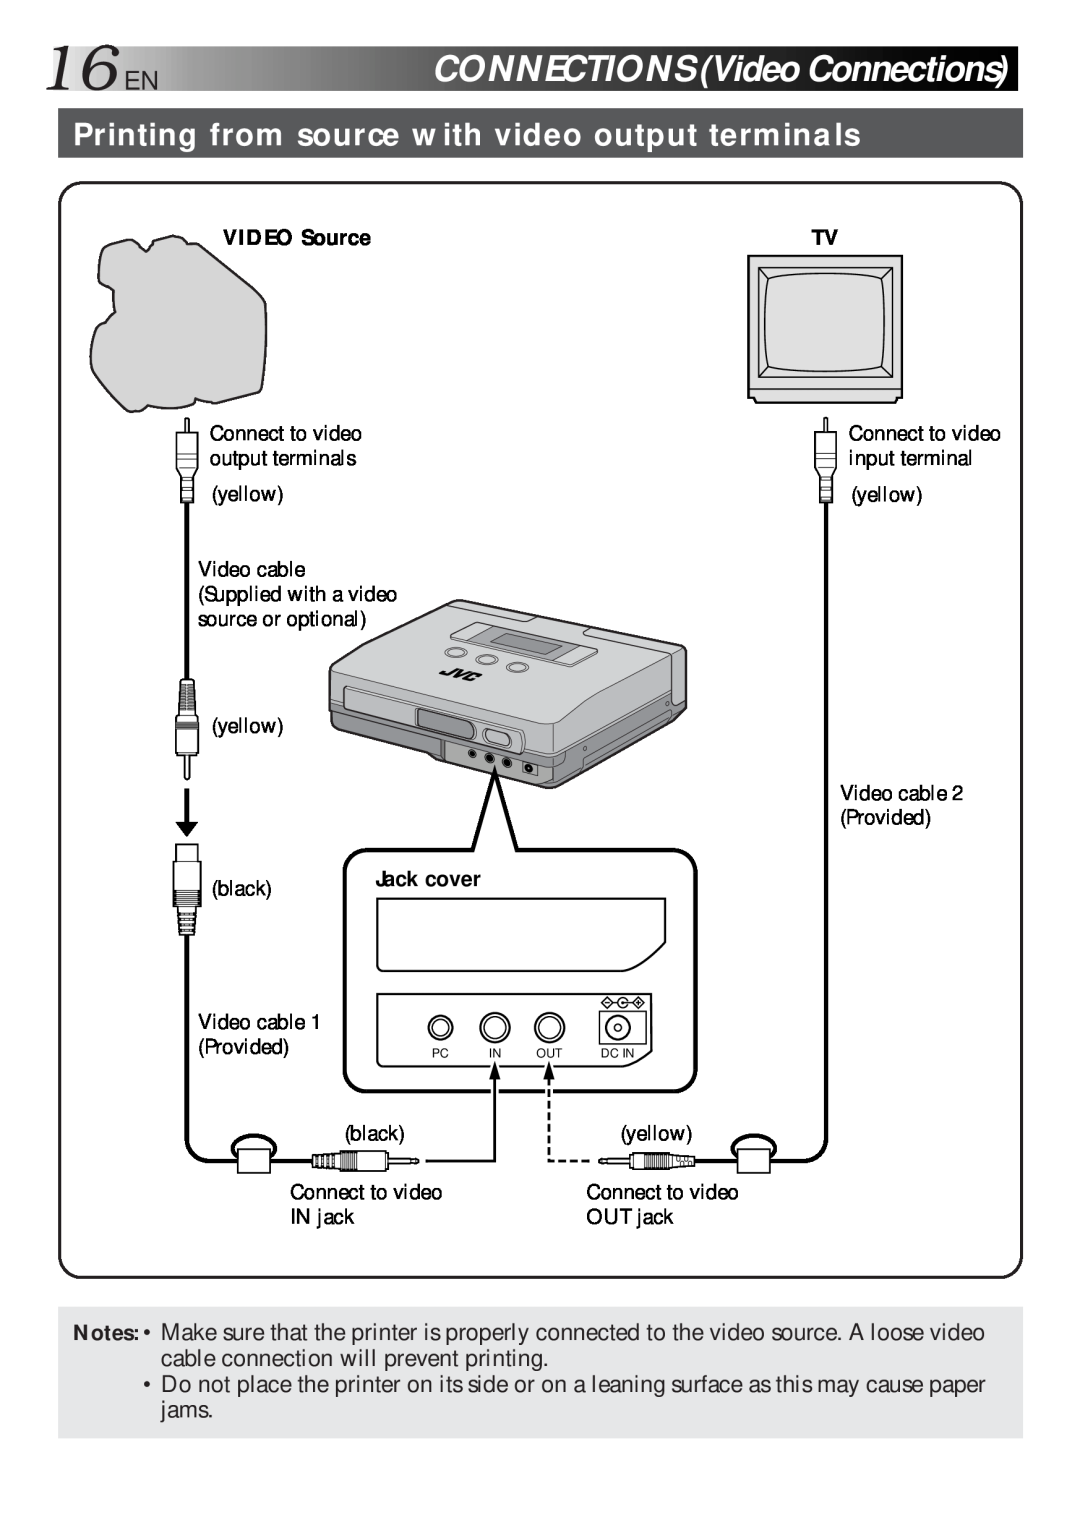 JVC GV-HT1U manual 16EN, CONNECTIONSVideoConnections, Printing from source with video output terminals 